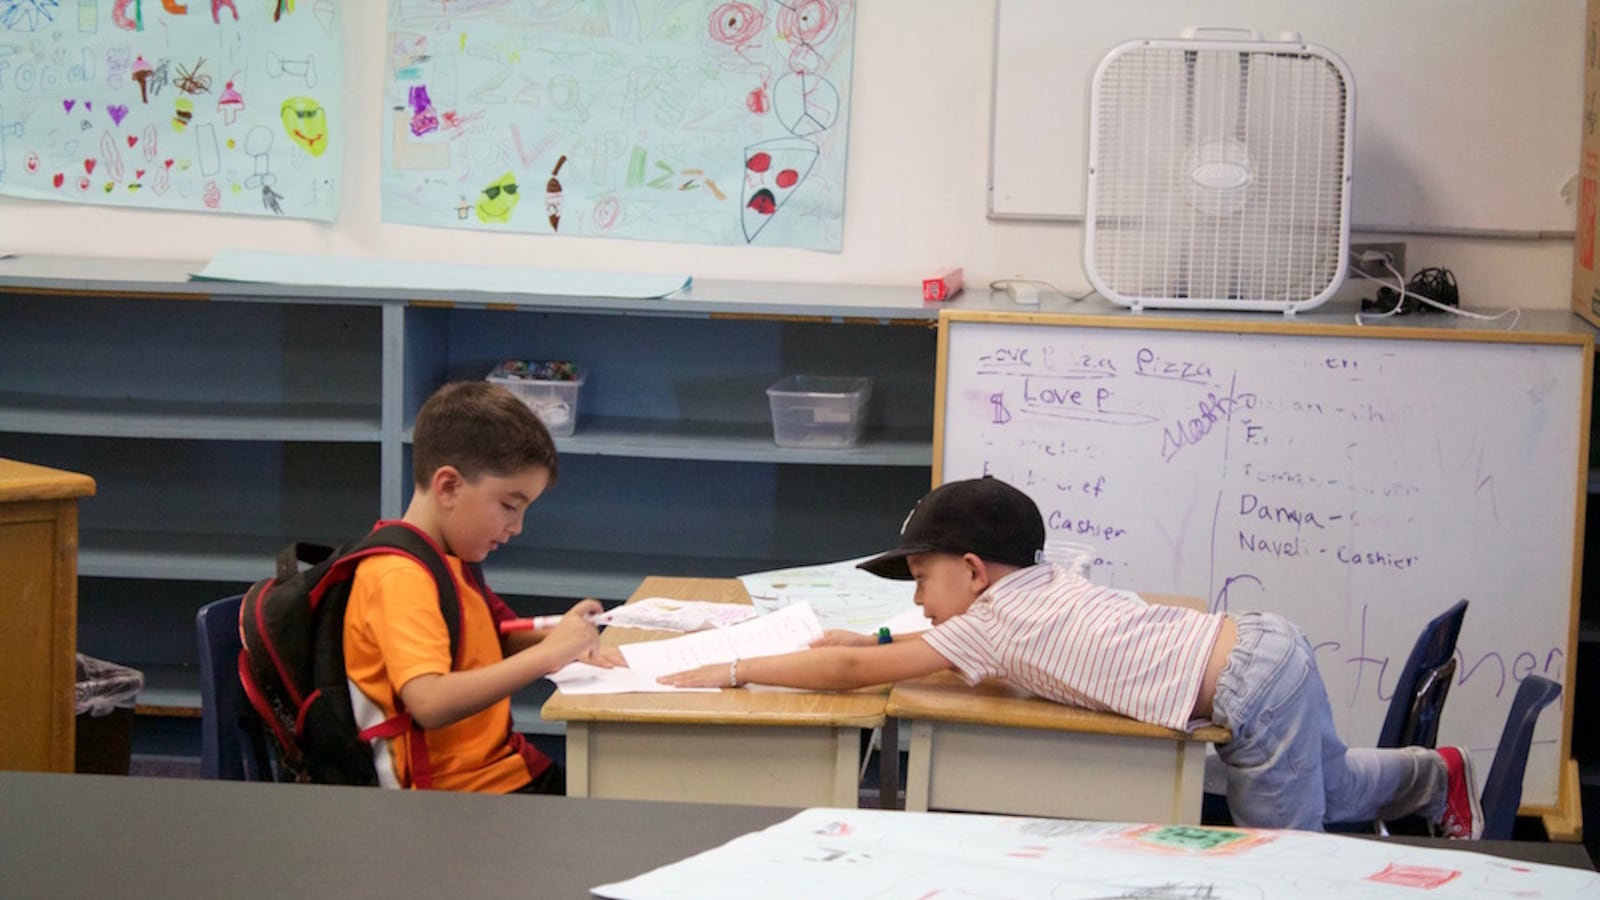 Two elementary students sit at a pair of desks in a classroom. One student is reaching over his desk toward the other student.